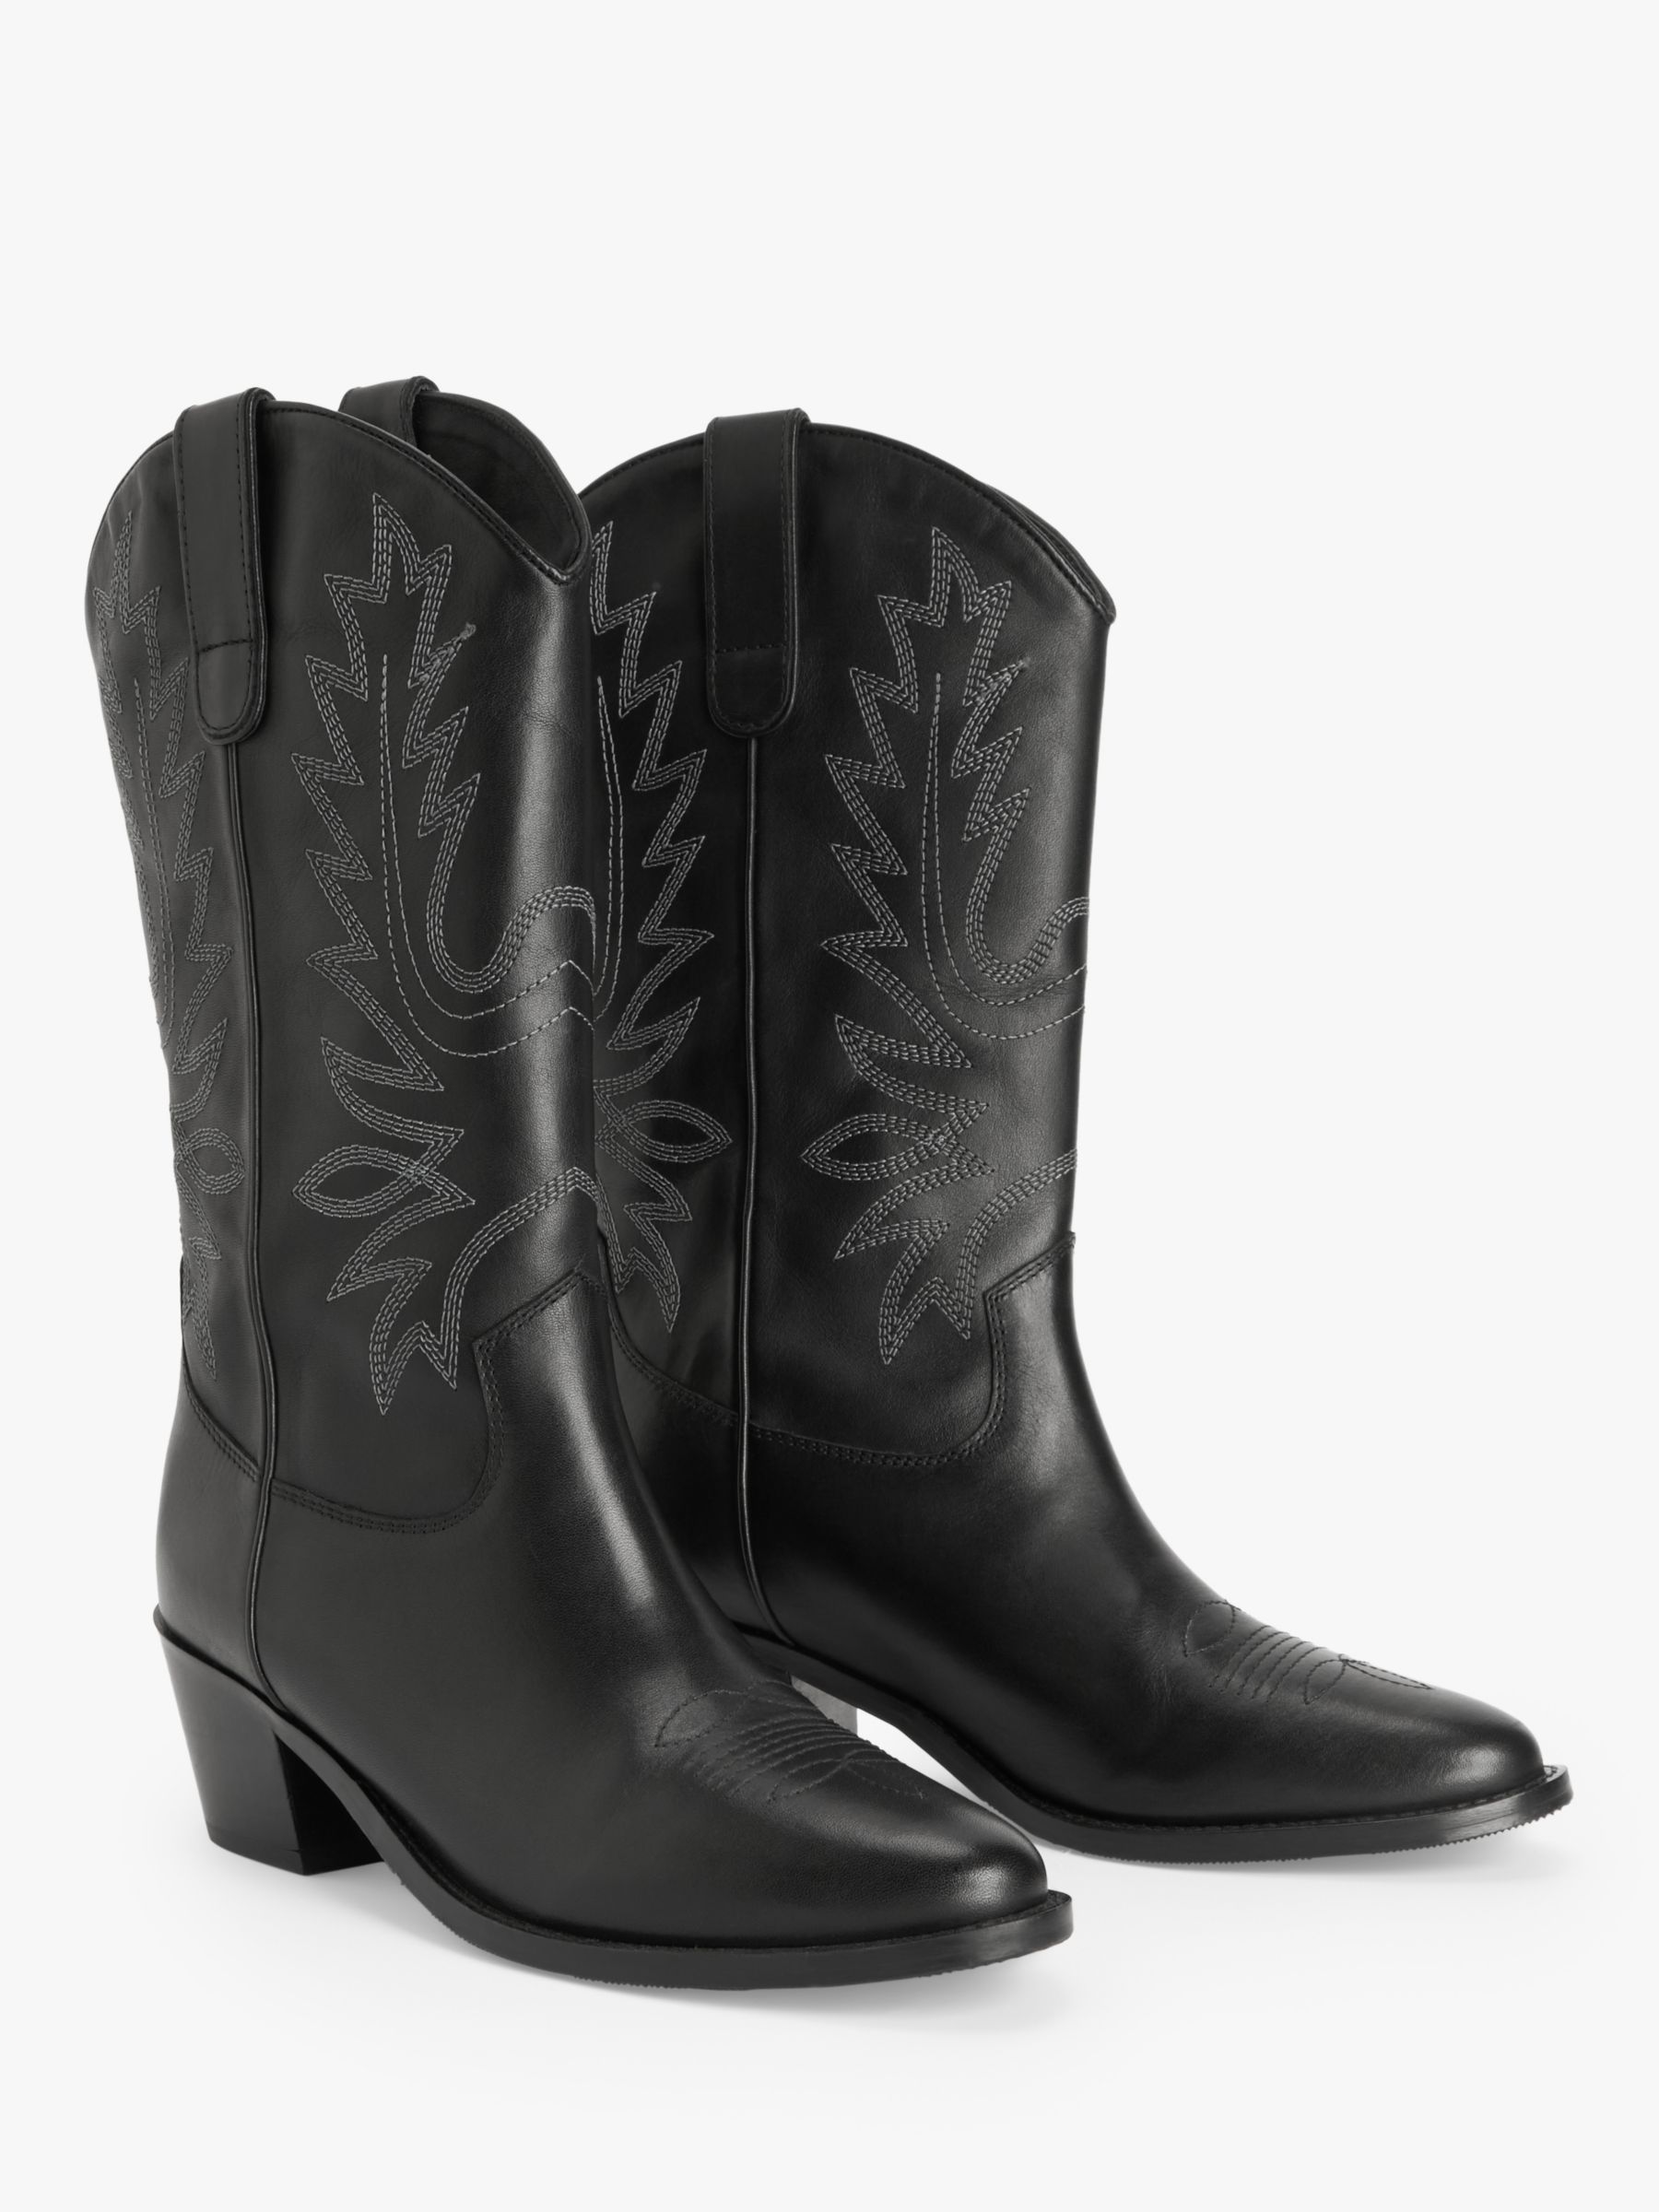 AND/OR Thorn Leather Embroidered Long Western Boots, Black, 6